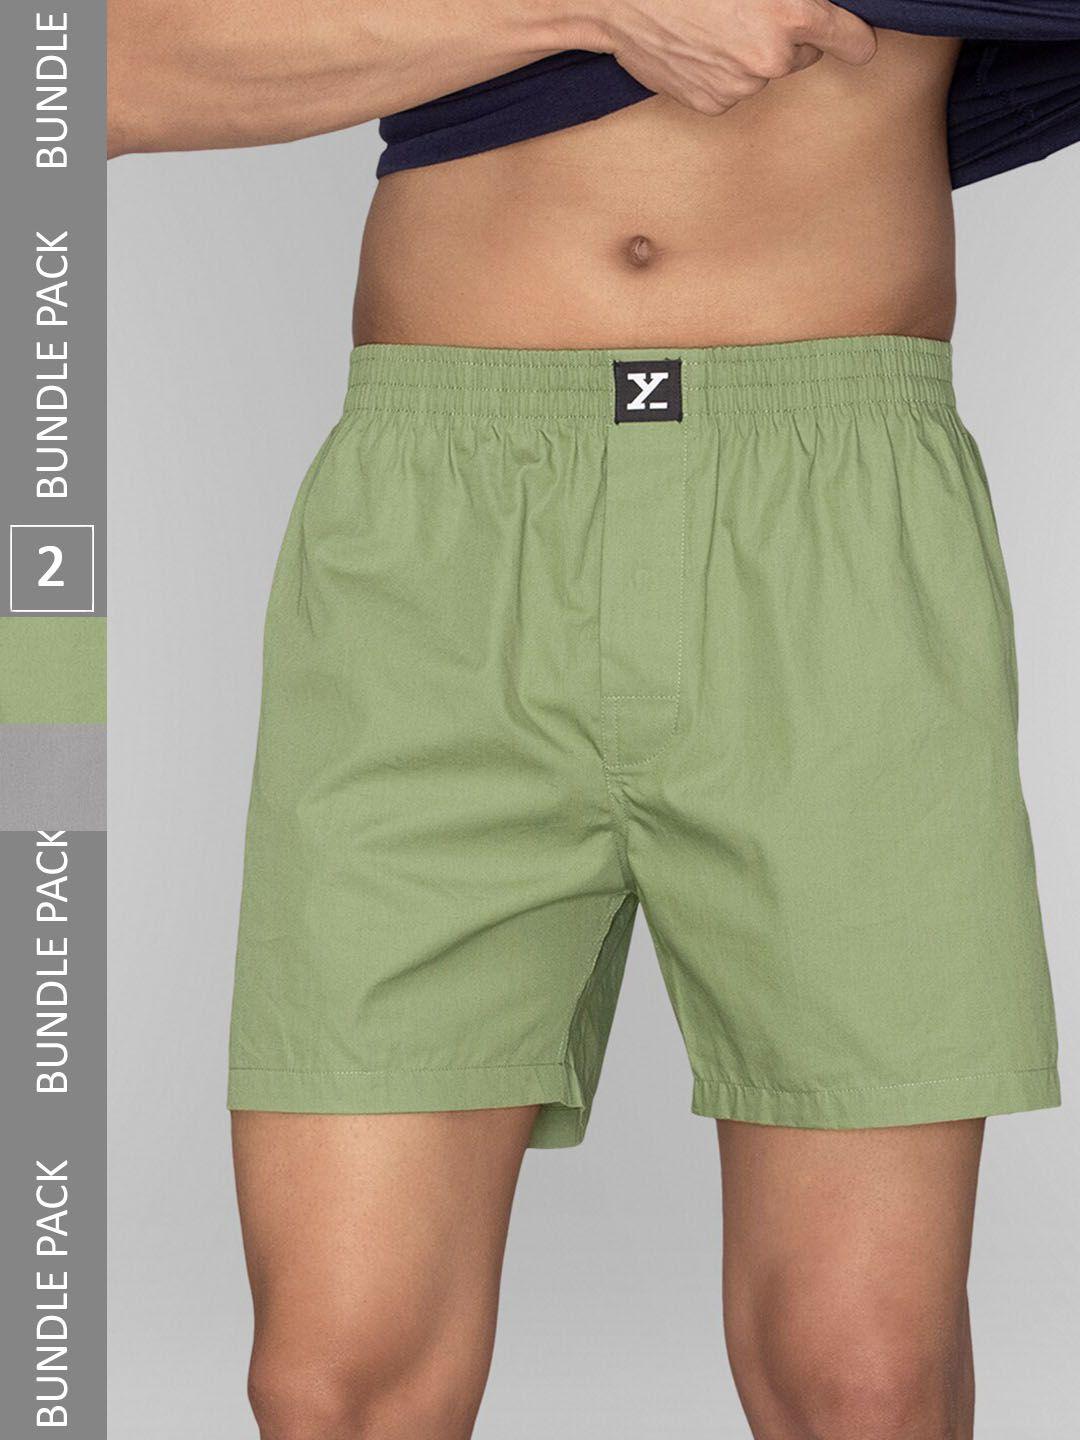 xyxx-men-pack-of-2-cotton-boxers-xybox2pckn345